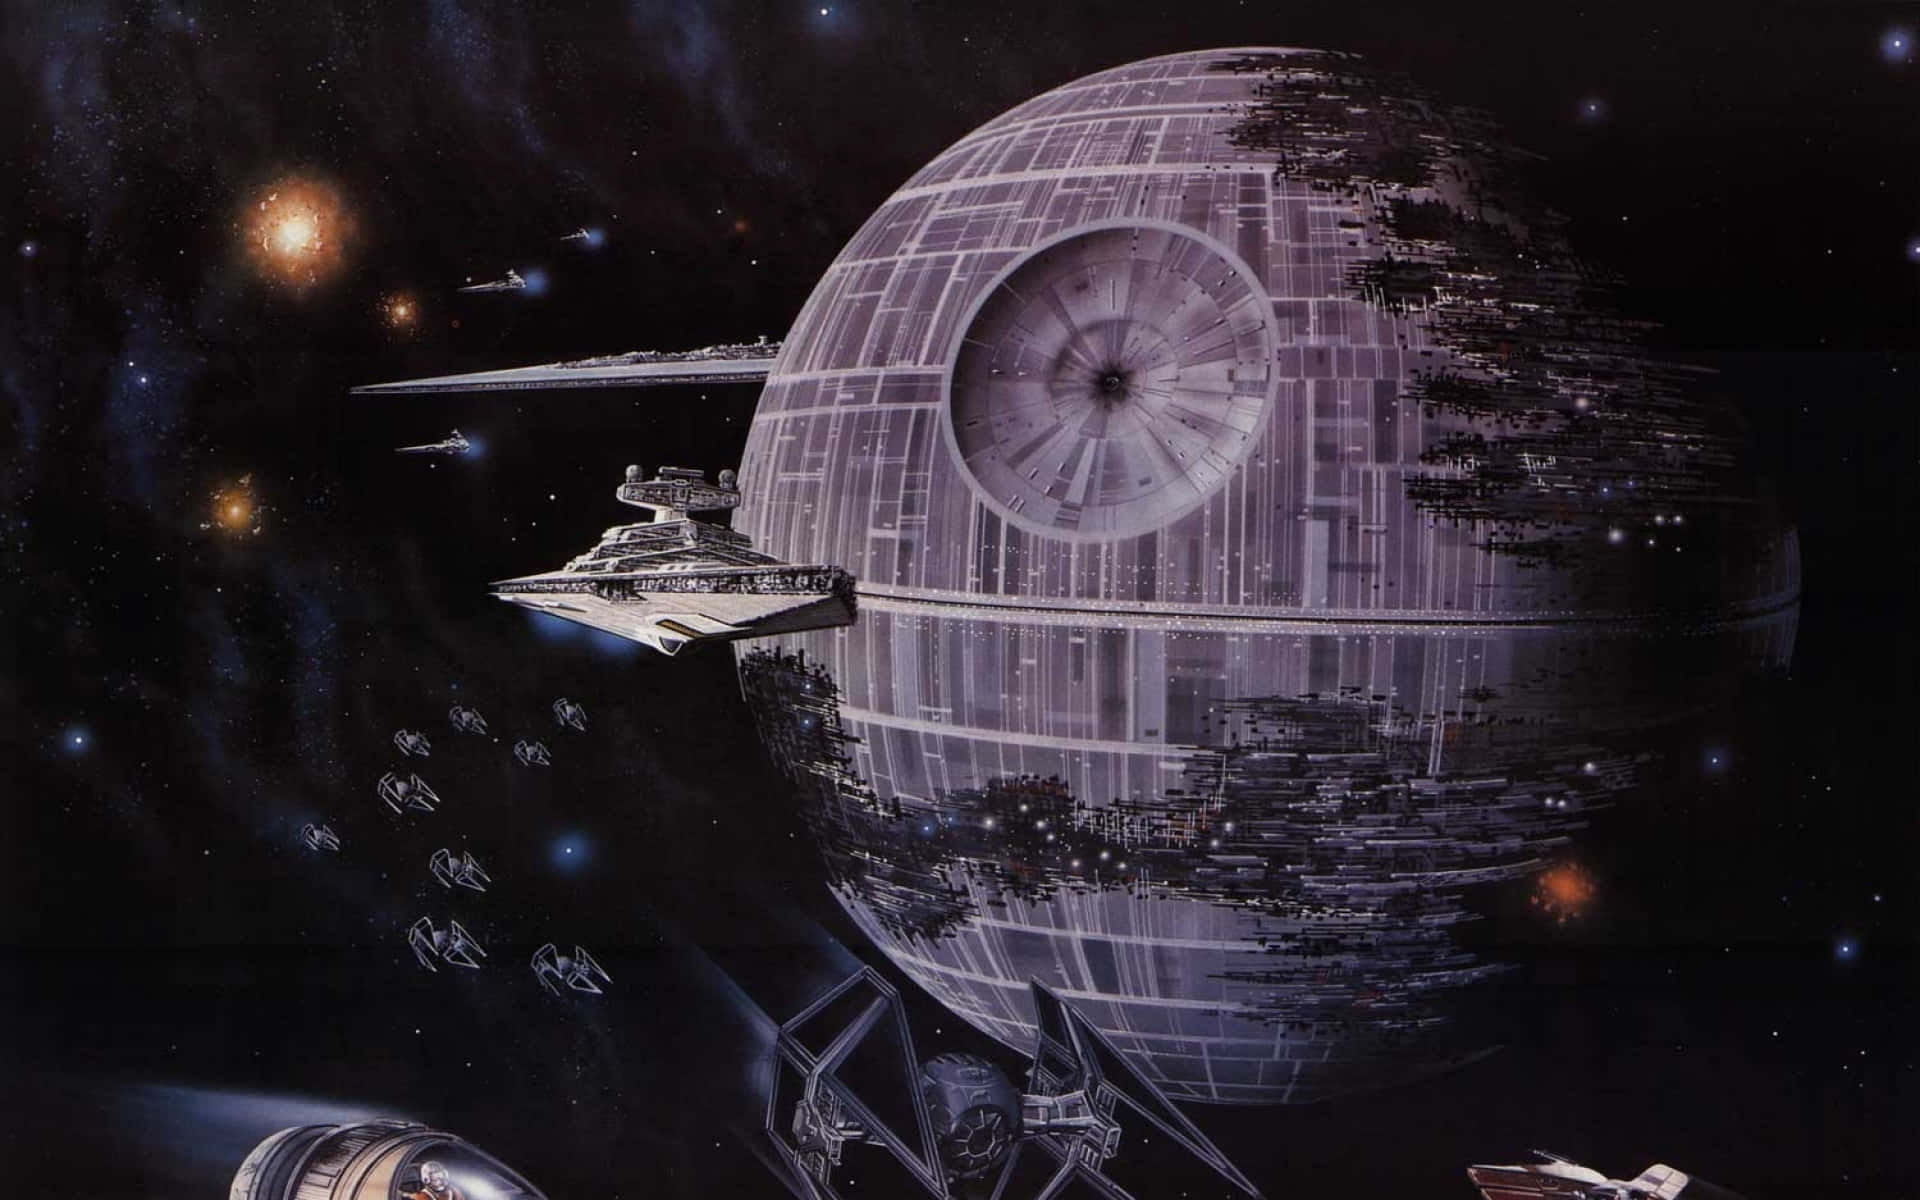 An epic view of the Imperial Death Star